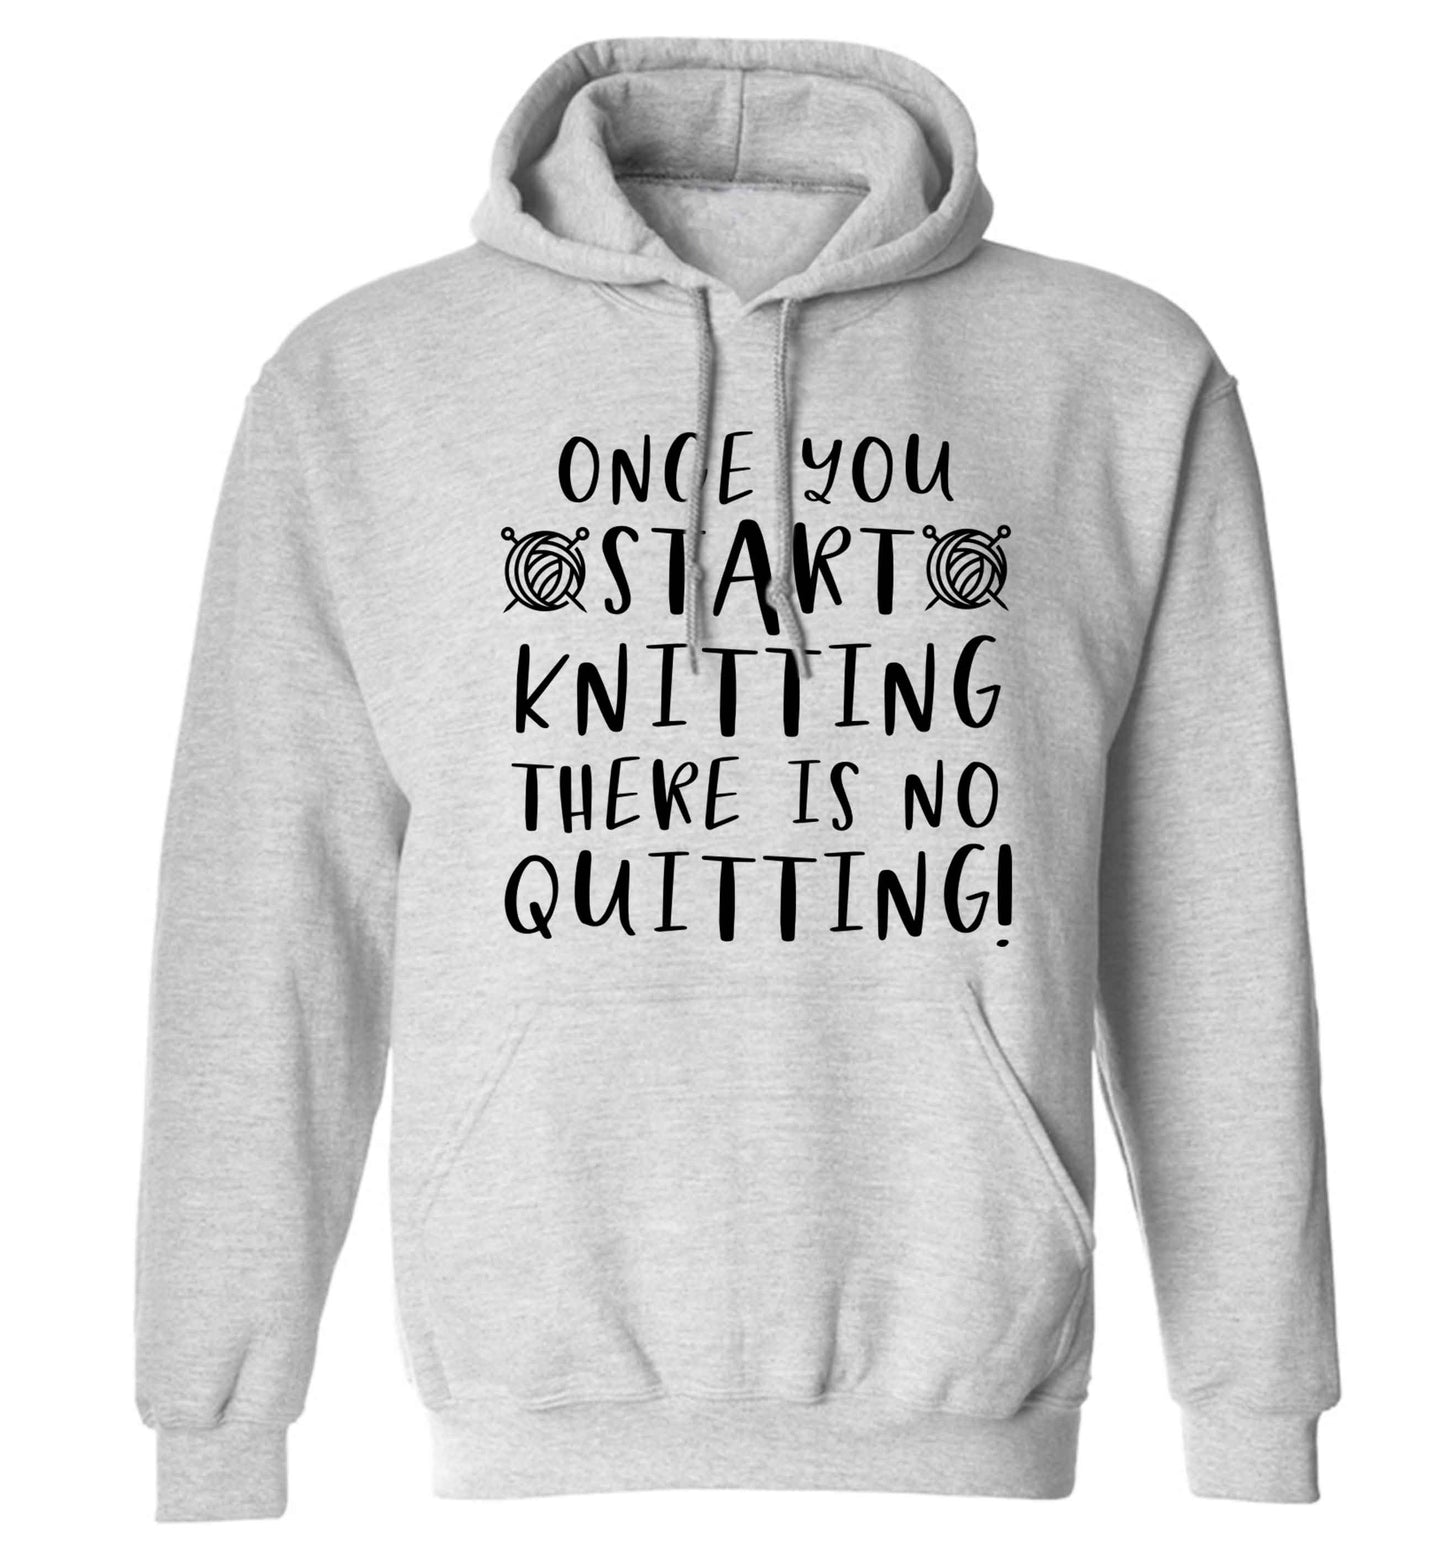 Once you start knitting there is no quitting! adults unisex grey hoodie 2XL